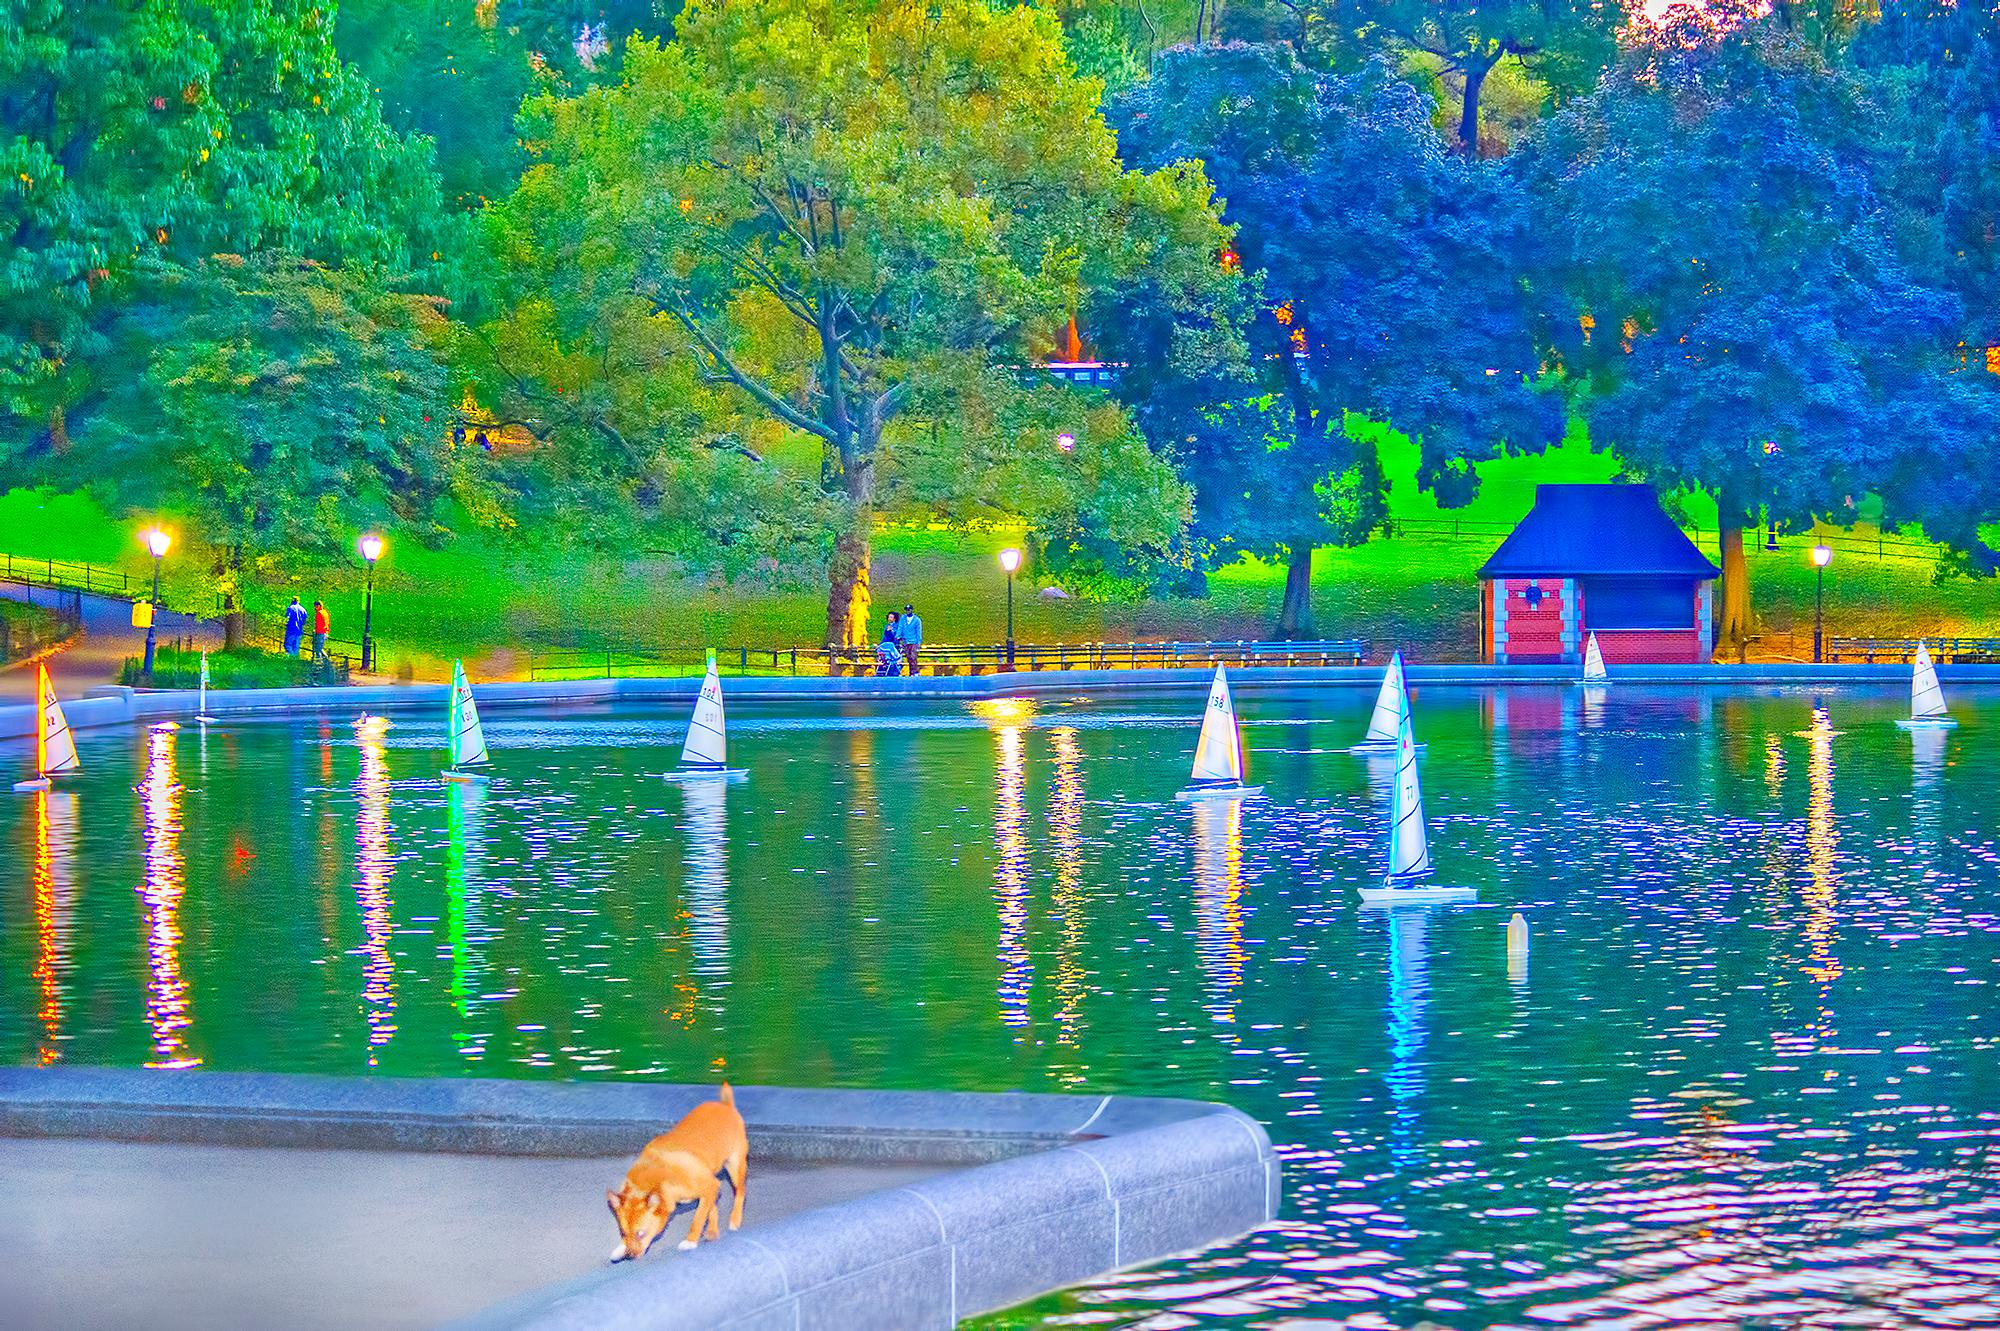 Model Sailboats In Central Park Pond, New York City